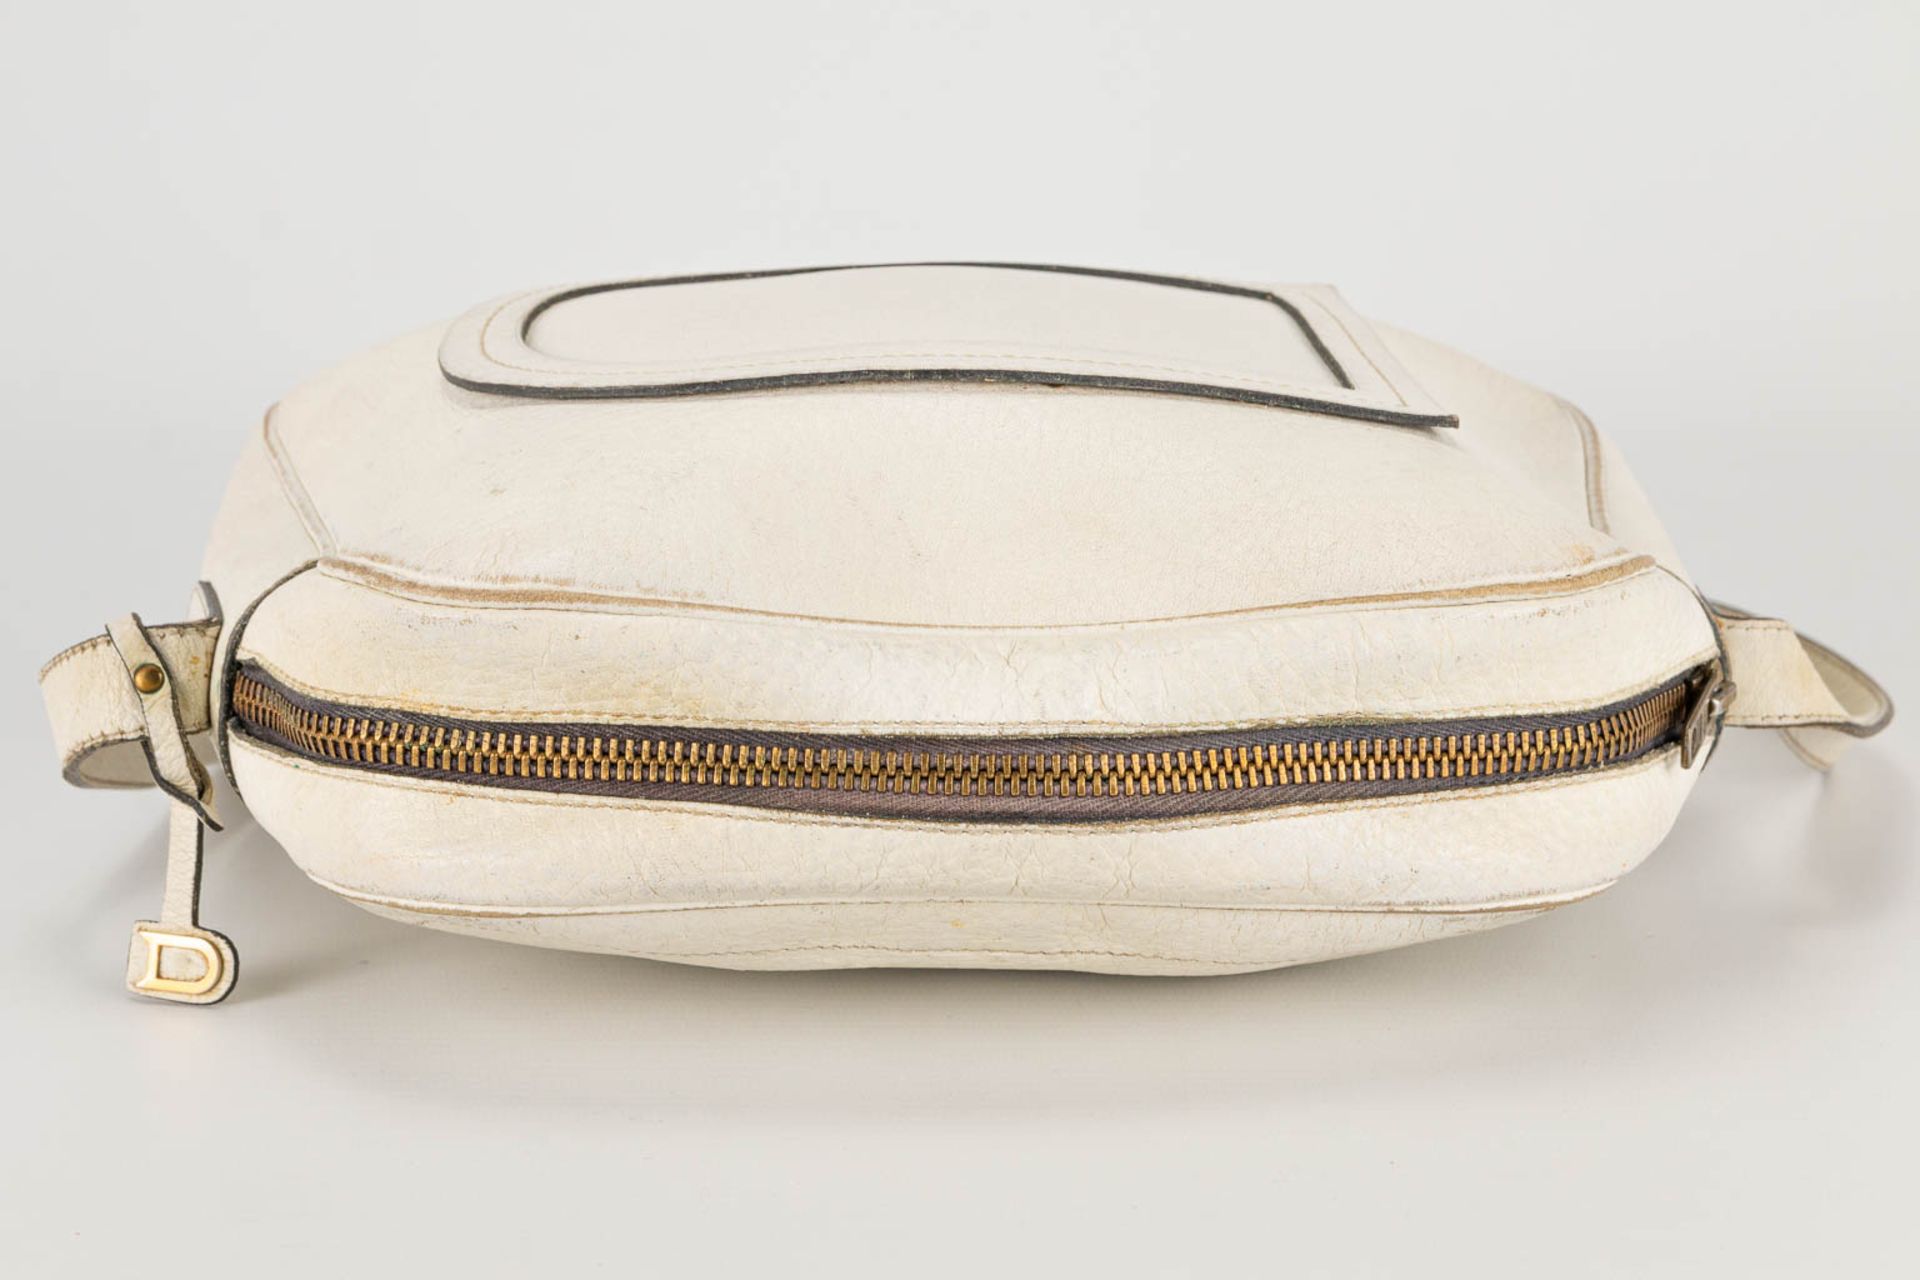 A purse made of white leather and marked Delvaux - Image 12 of 14